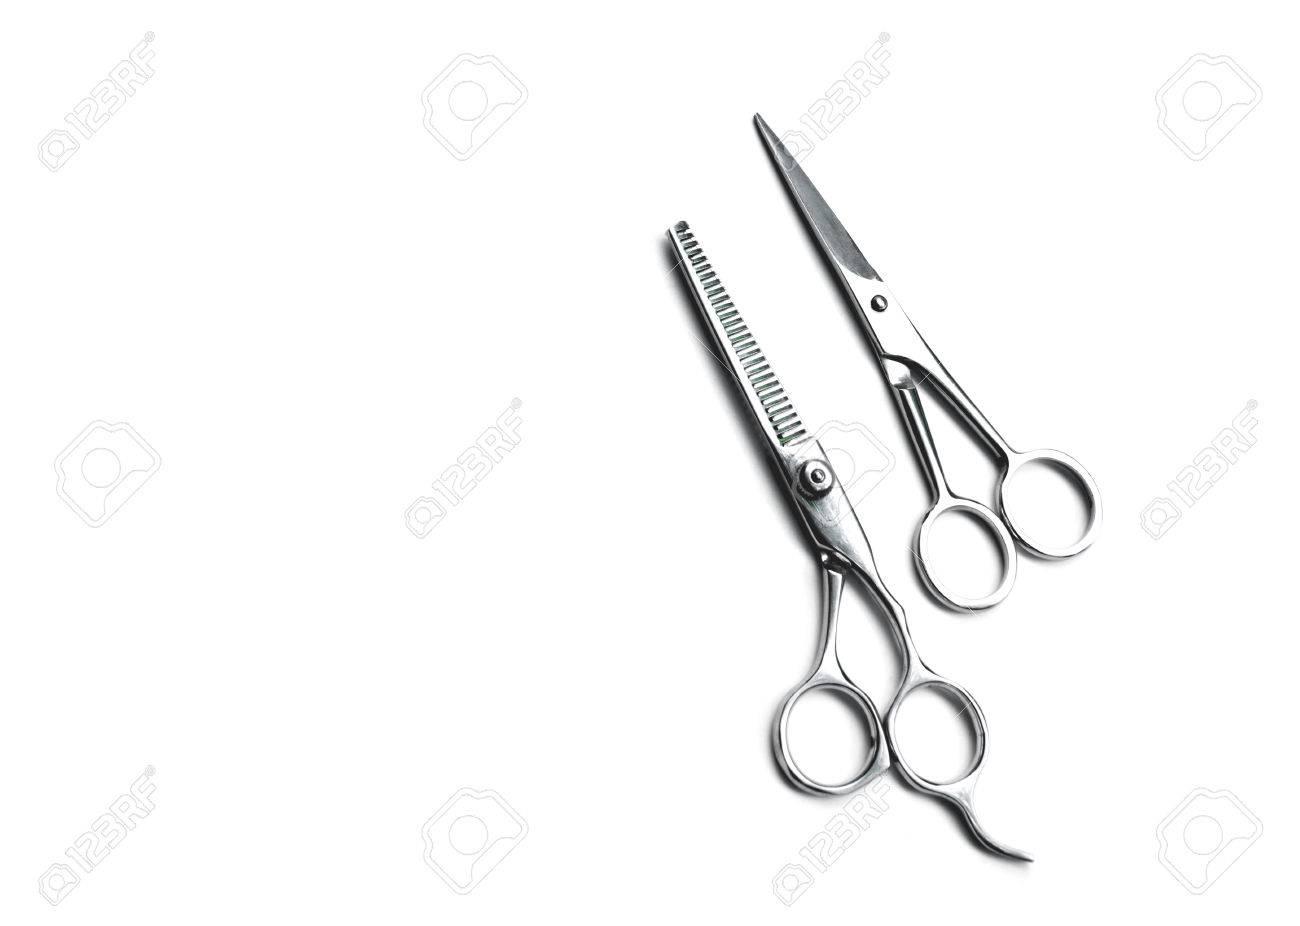 1300 x 926 · jpeg - Free download Barber Scissors Isolated Hair Cutting On White Background ...